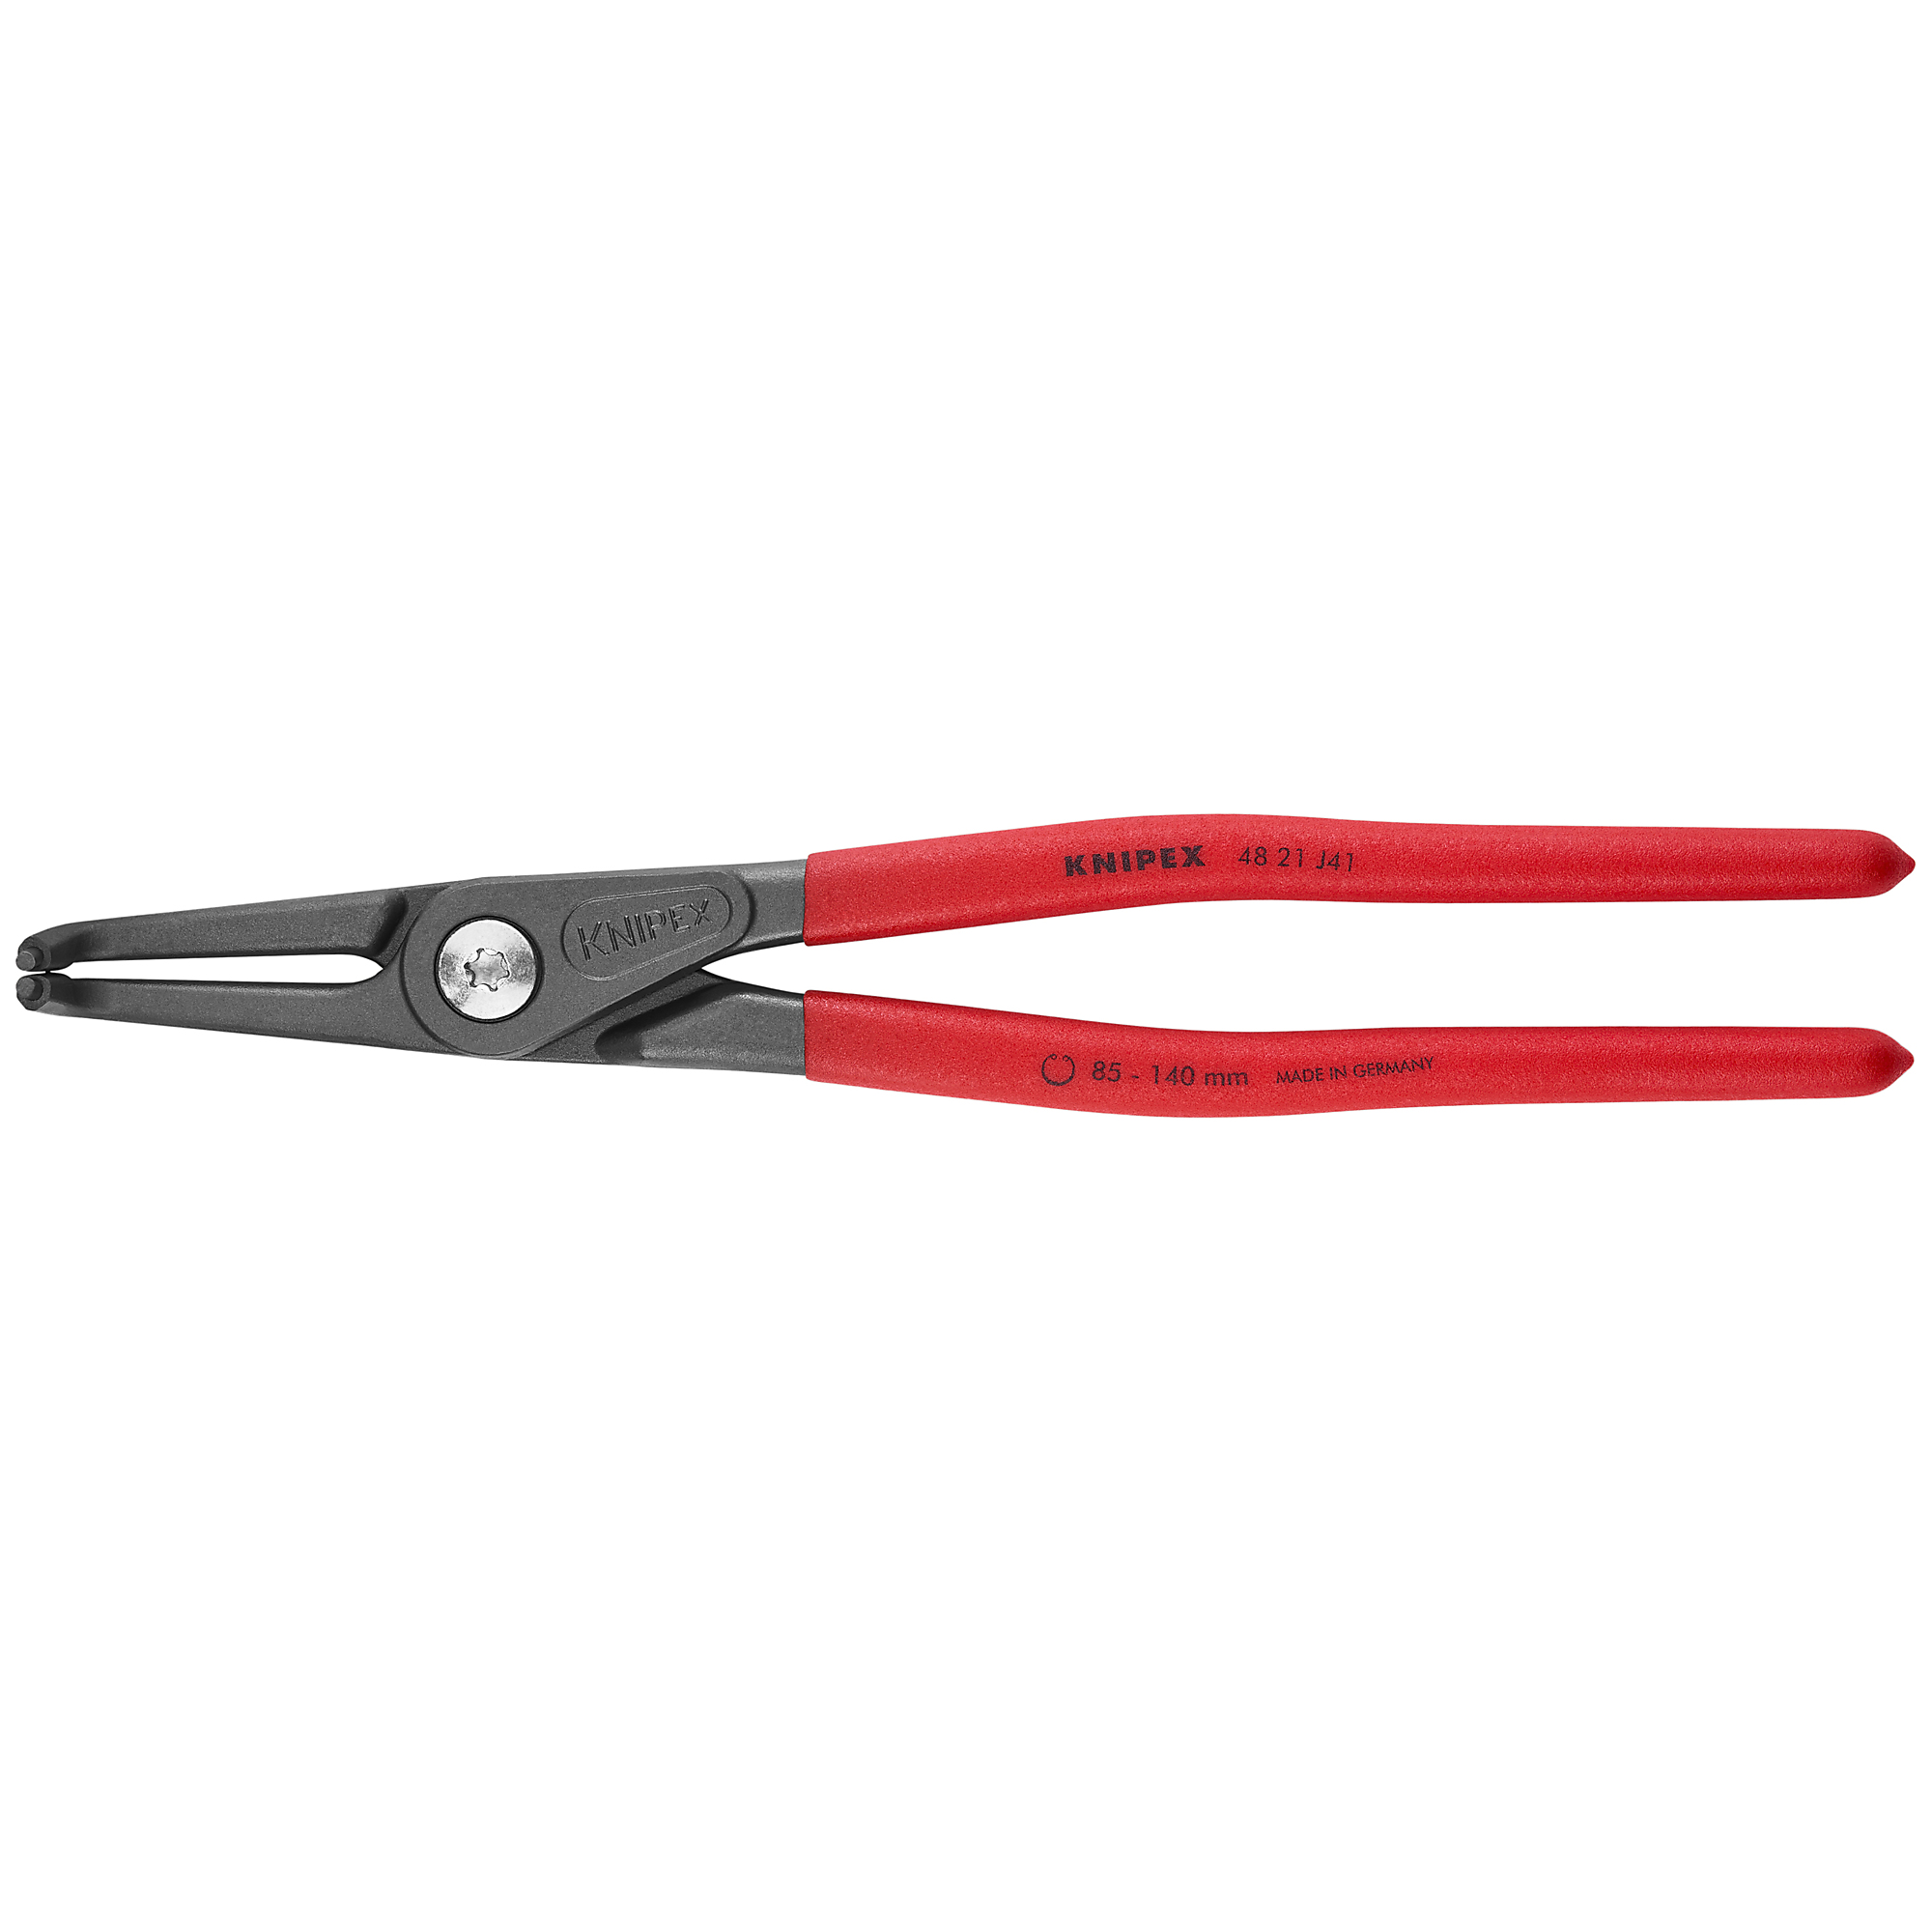 KNIPEX, Int 90Â° Prec. Snap Ring Pliers, 1/8 tip, 12Inch, Pieces (qty.) 1 Material Steel, Model 48 21 J41